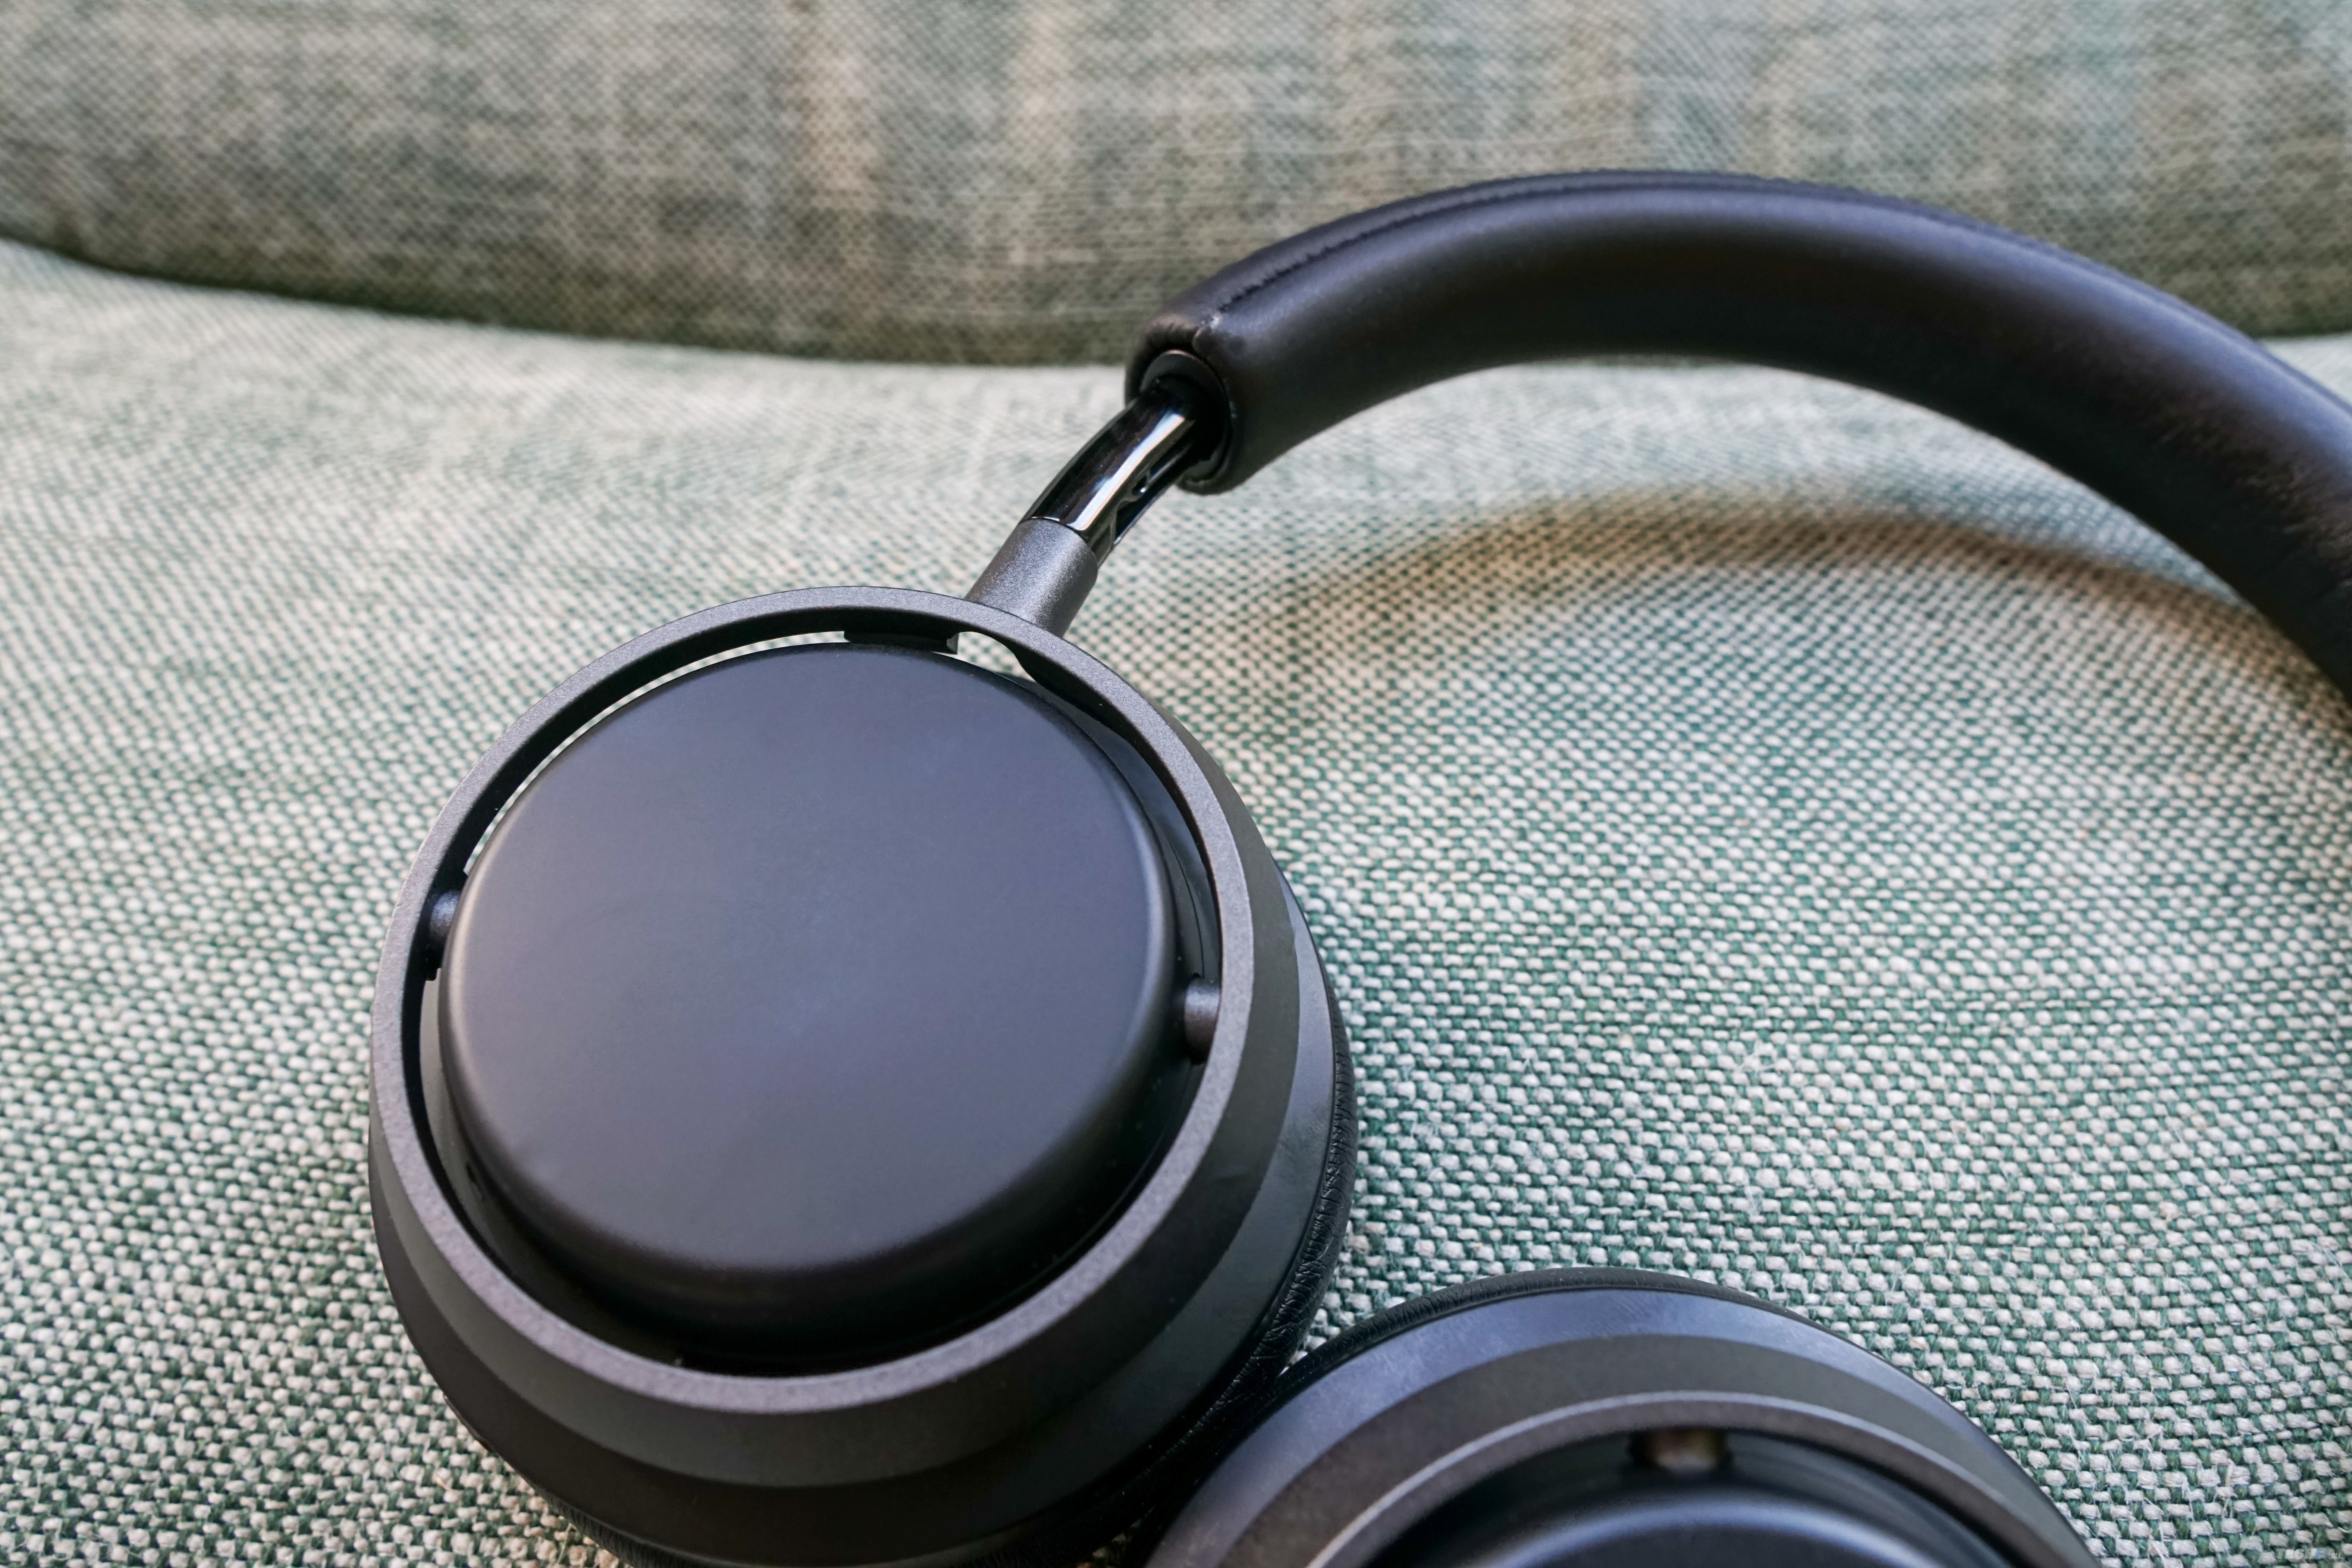 Philips Fidelio L4 review: rich and crisp audio quality with some strange  bugs